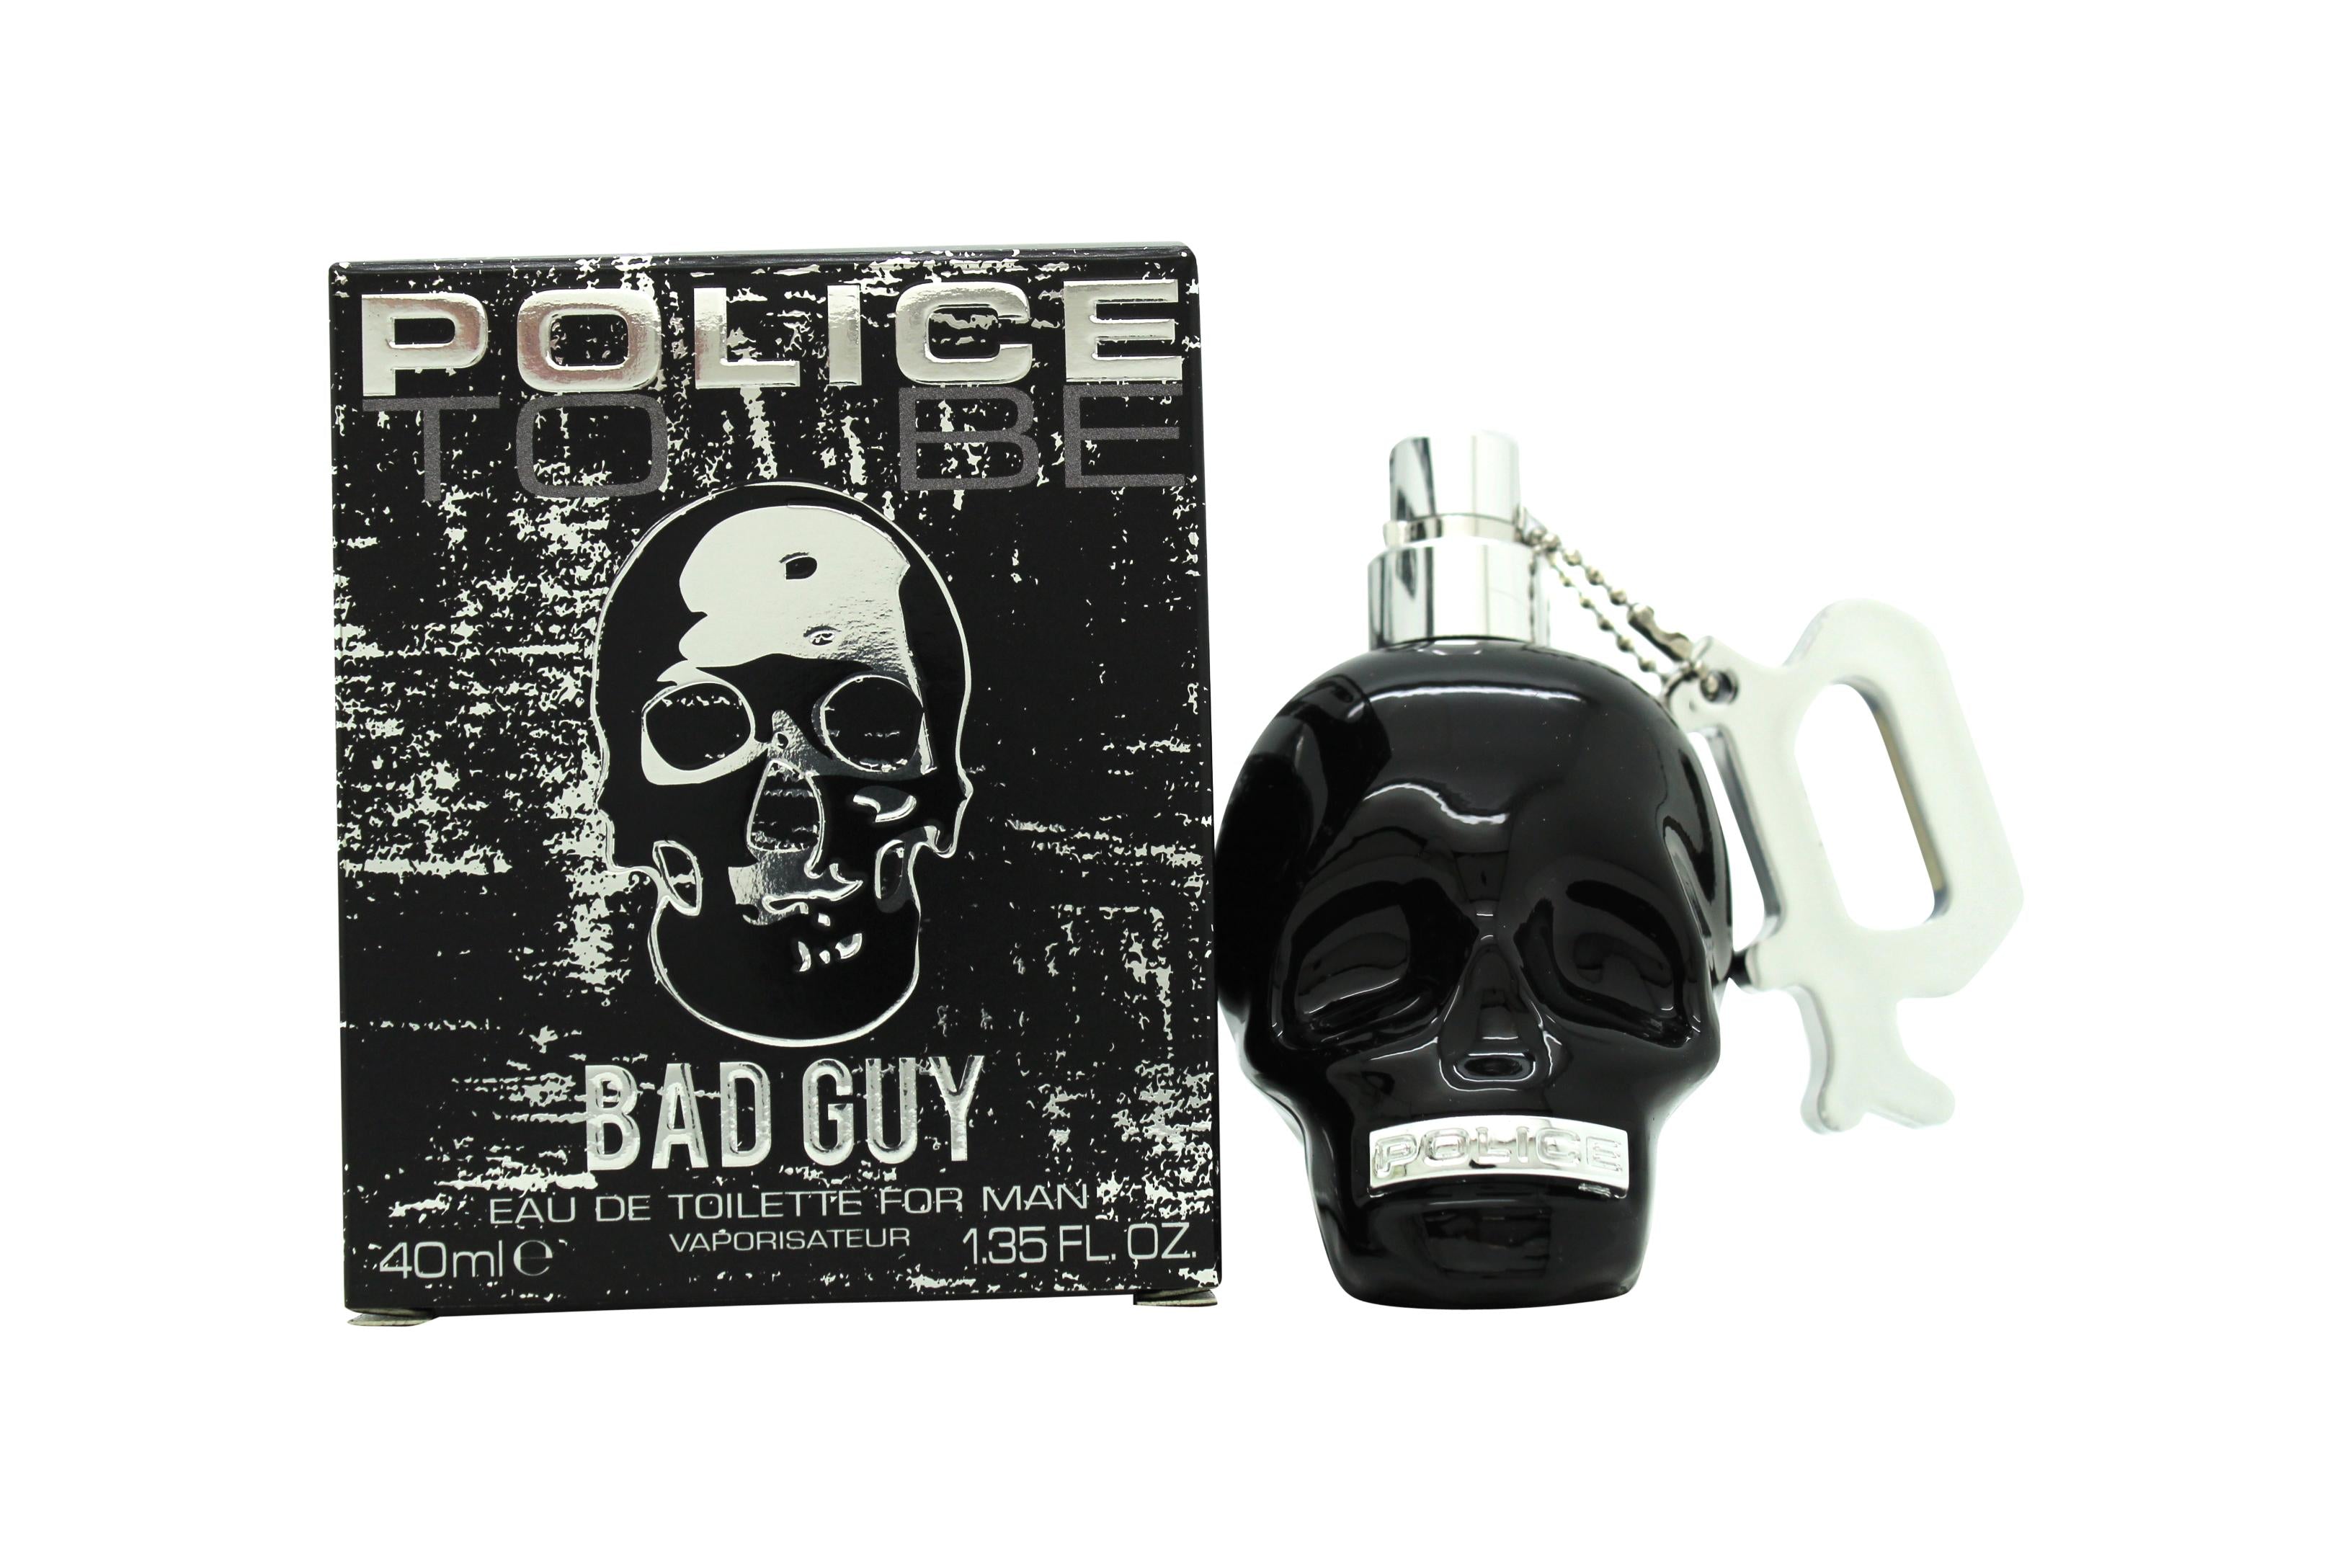 View Police To Be Bad Guy Eau de Toilette 40ml Spray information